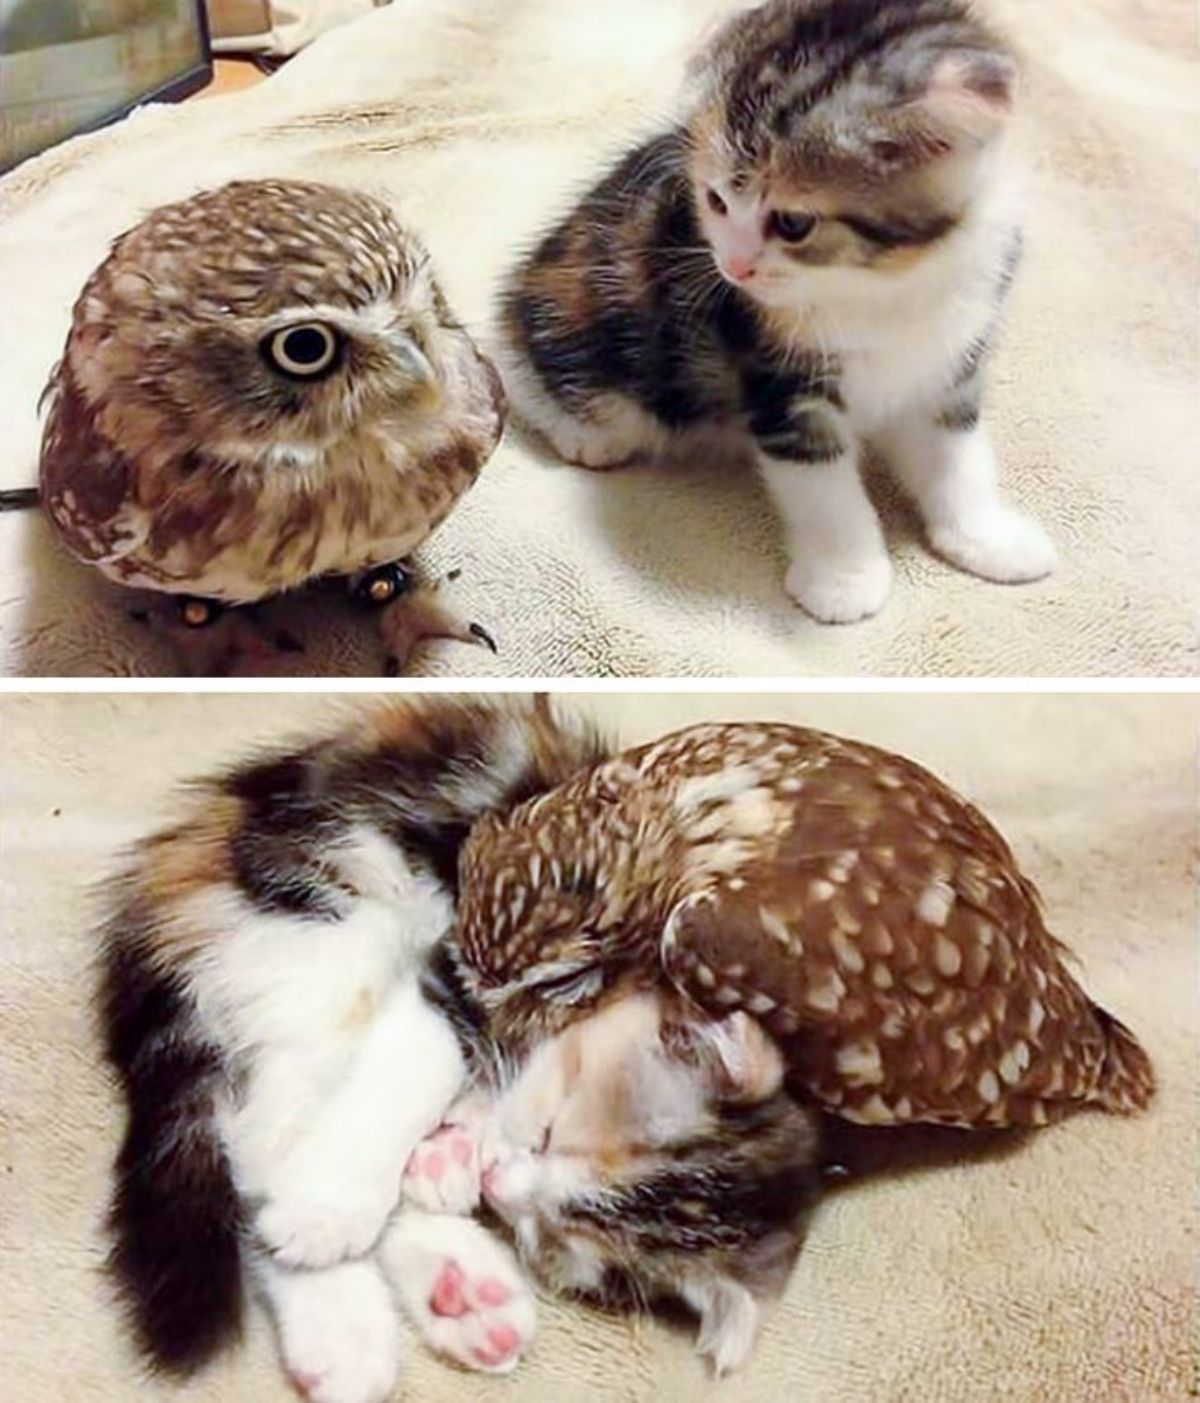 2 photos of a brown and white owl with a calico kitten